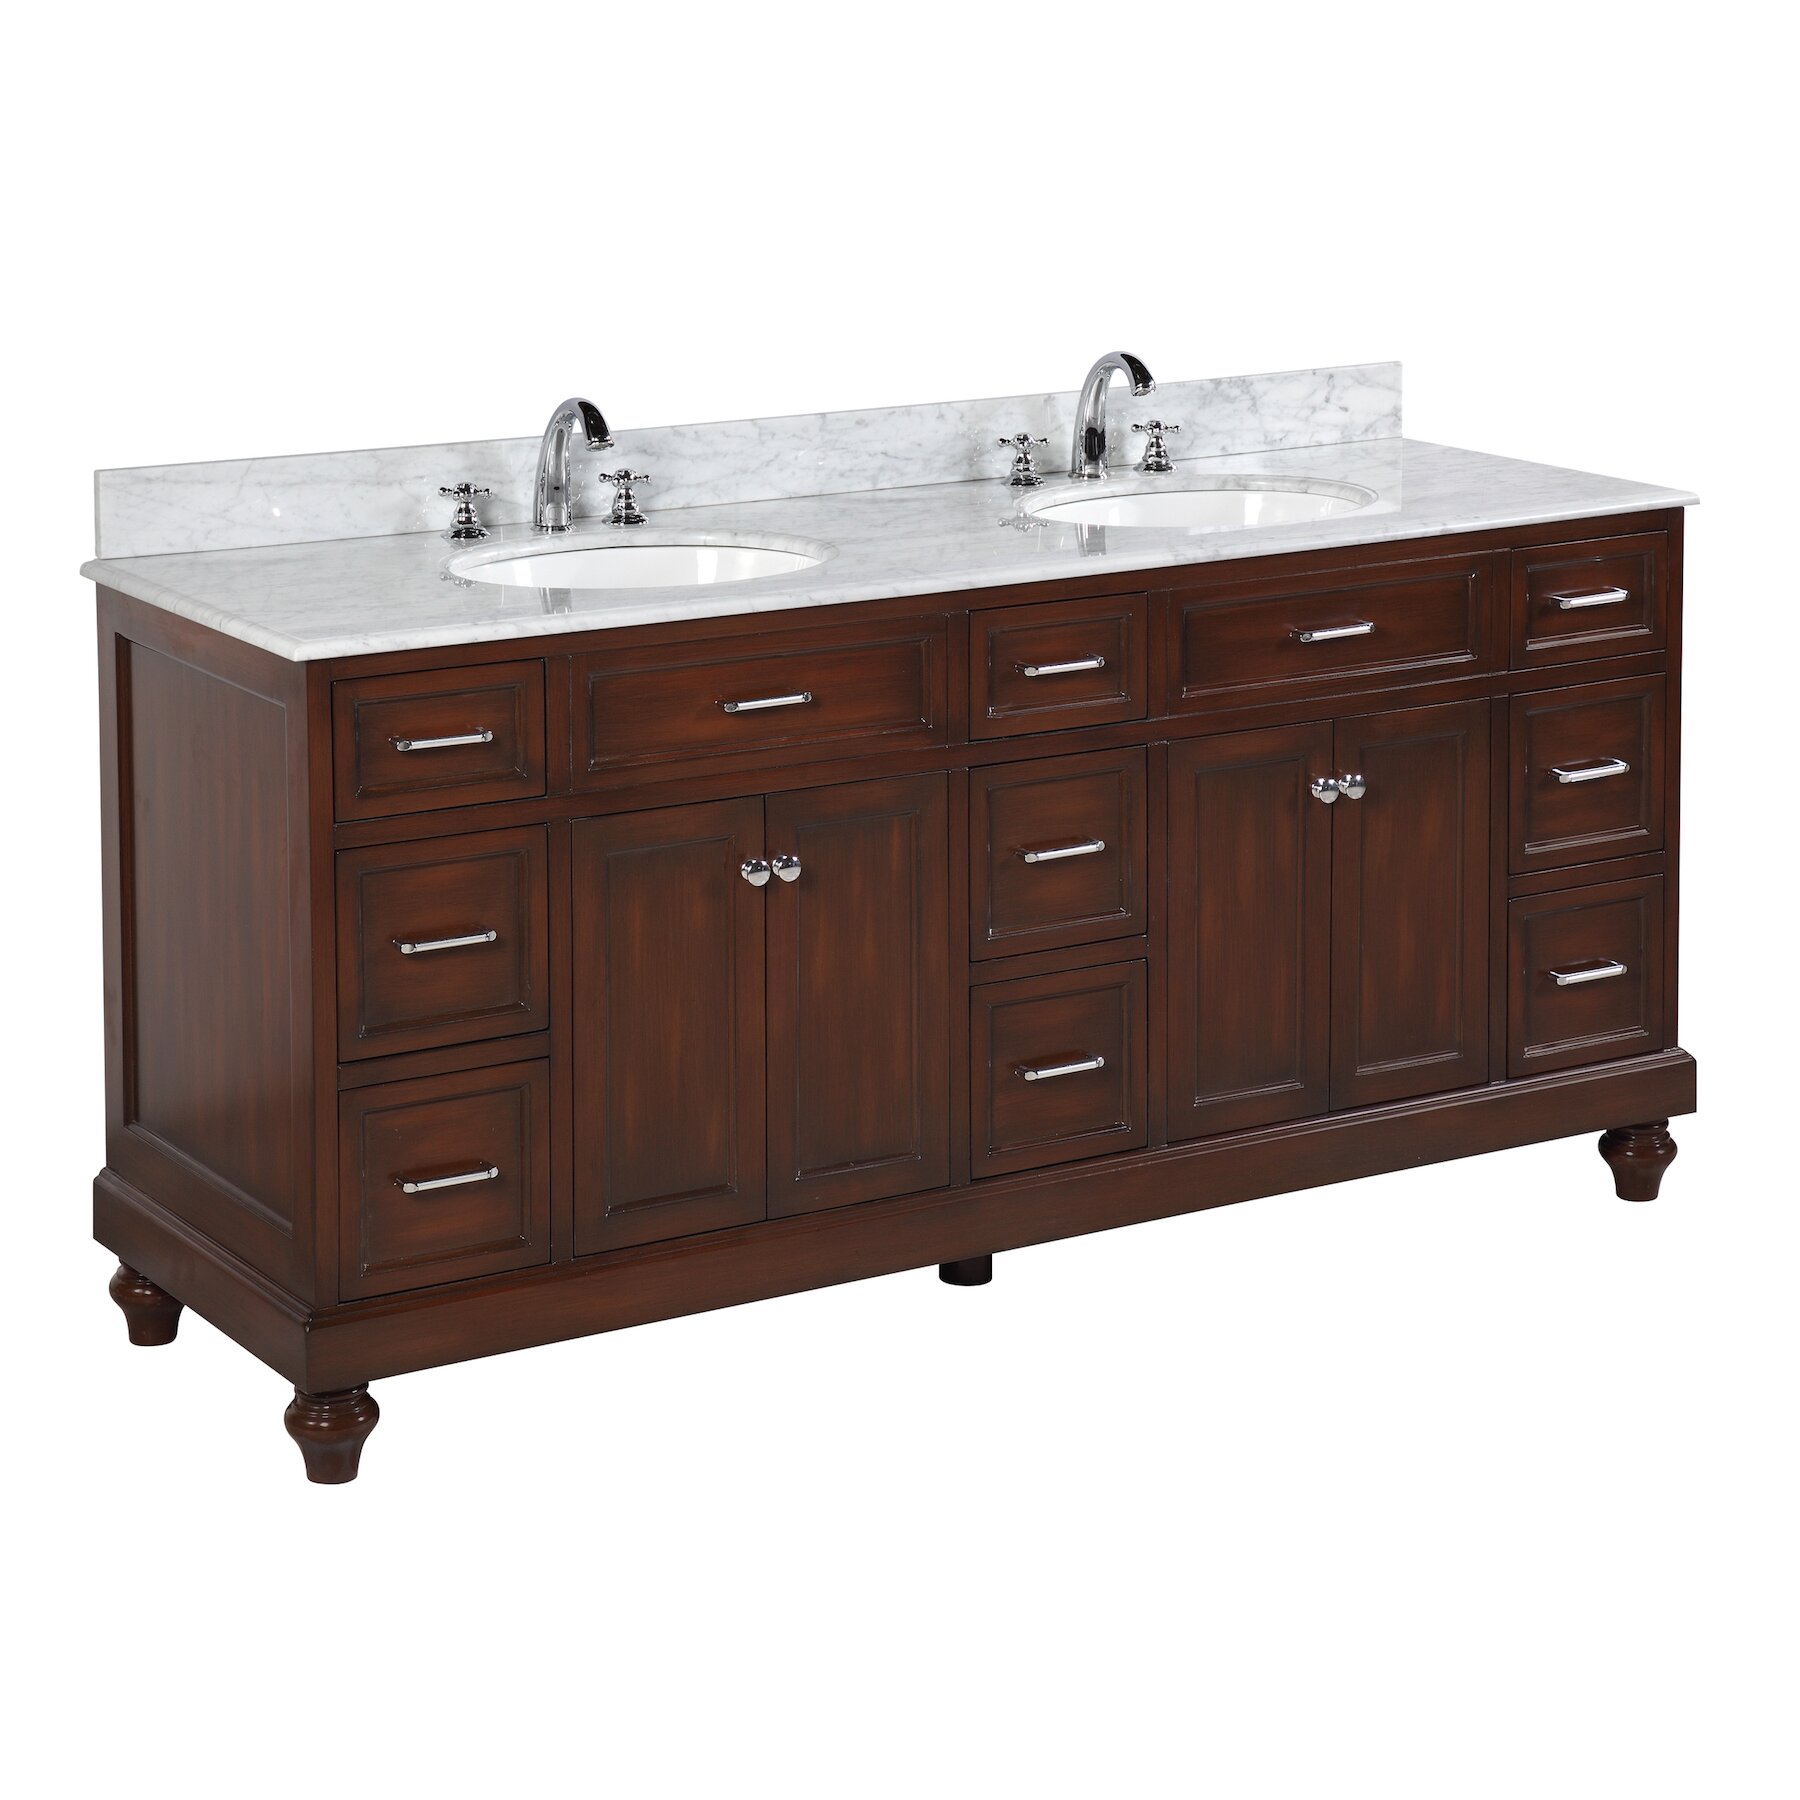 13 Types Of Bathroom Vanities You Need To Know About Home Stratosphere